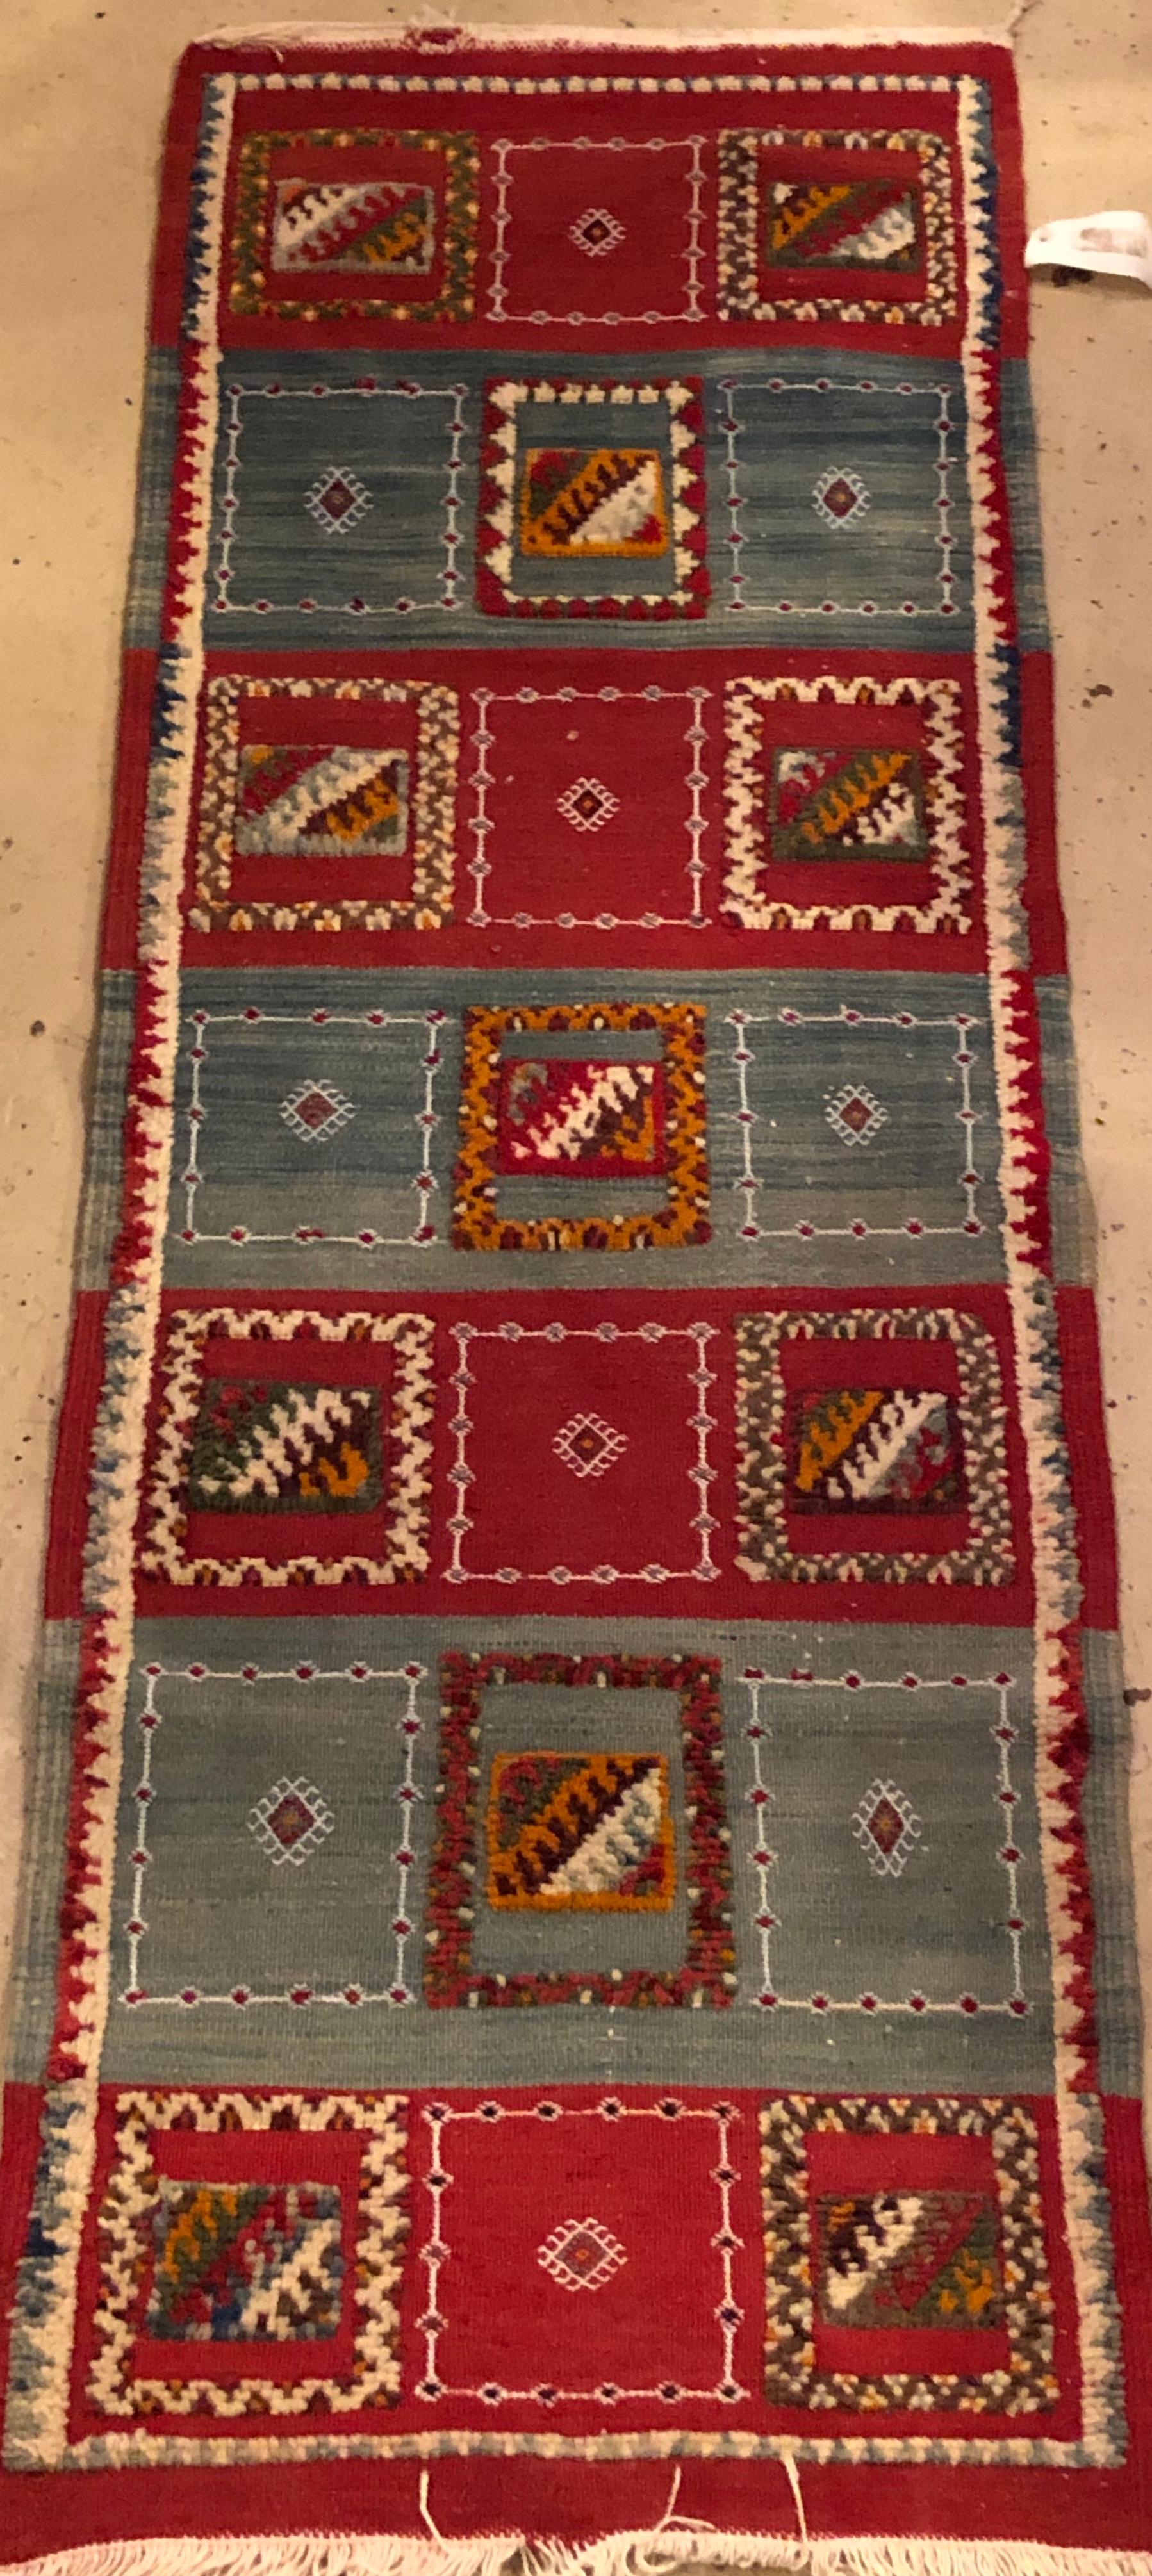 Tribal Moroccan runner-blue, red geometric patterns handwoven organic rug
An elegant and ennobling addition to hallways, foyers, entryways, dressing rooms, staircases and wherever else a slender rug is desired. This rug is handwoven rug from the